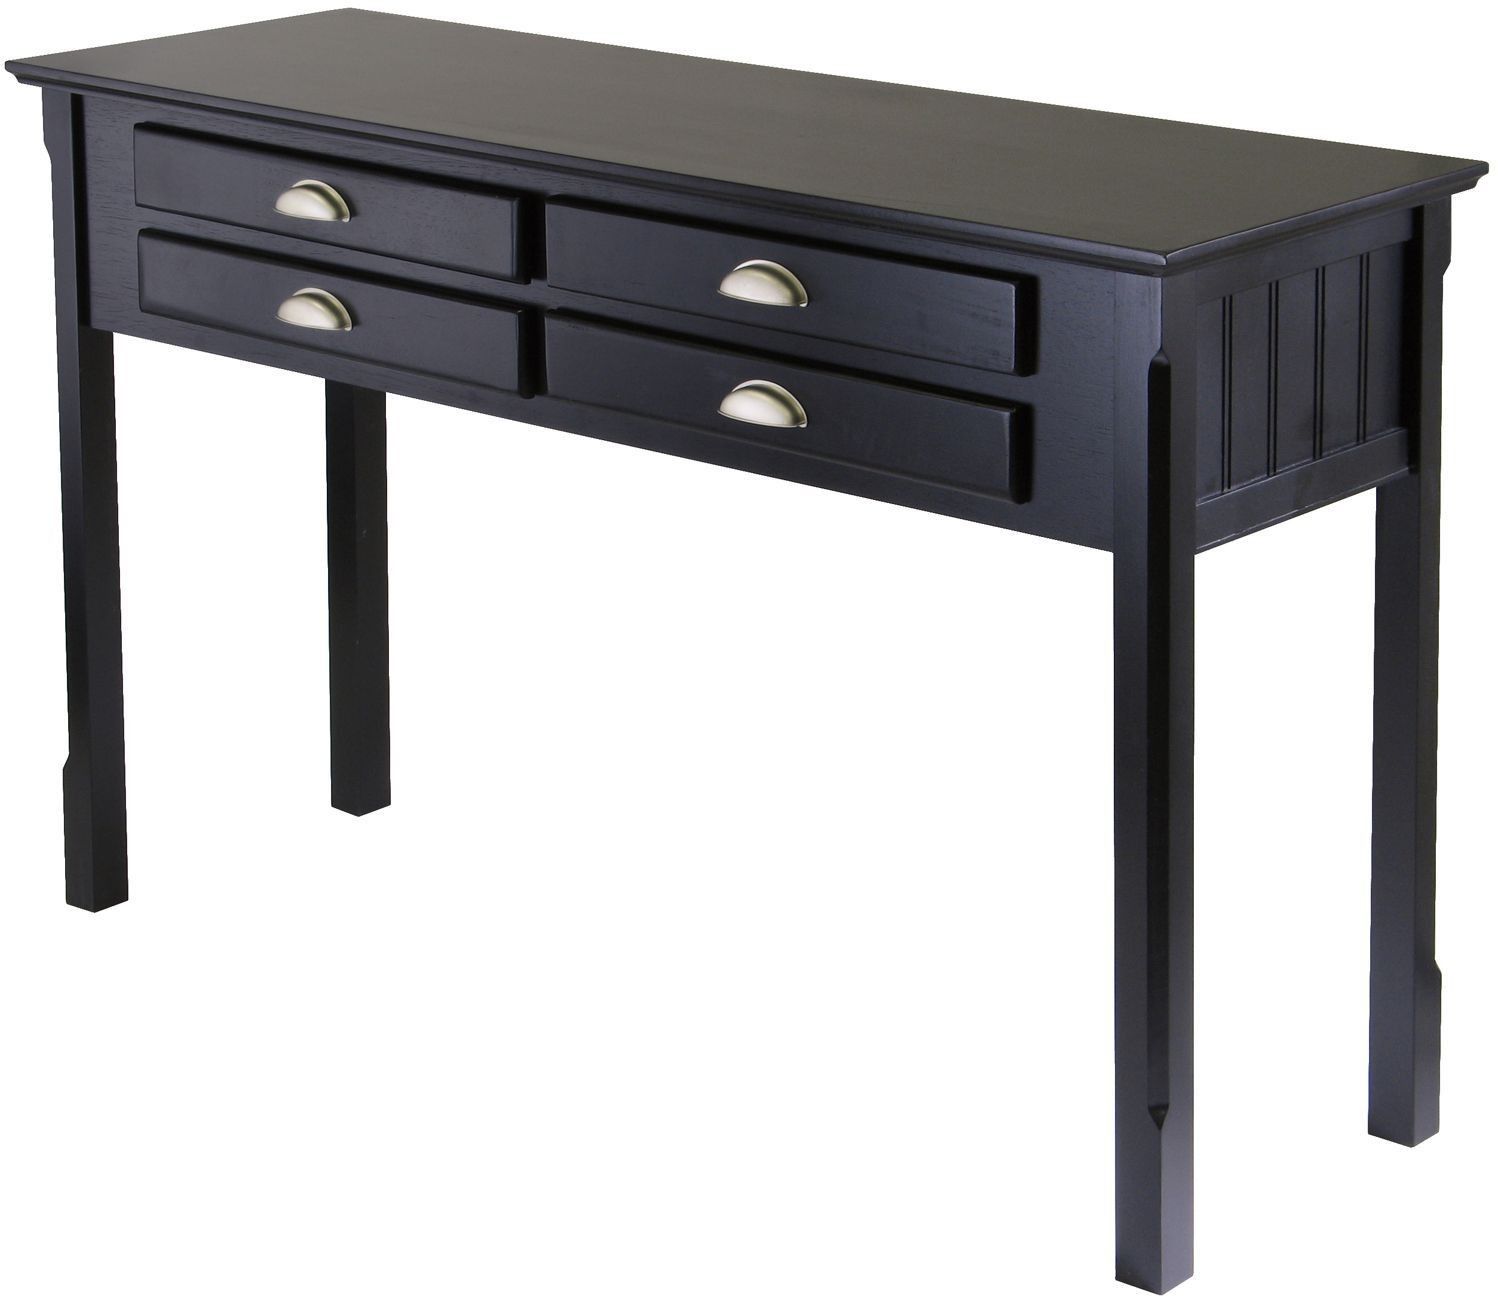 Timber Black Hall/console Table From Winsomewood | Coleman Regarding Aged Black Console Tables (View 4 of 20)